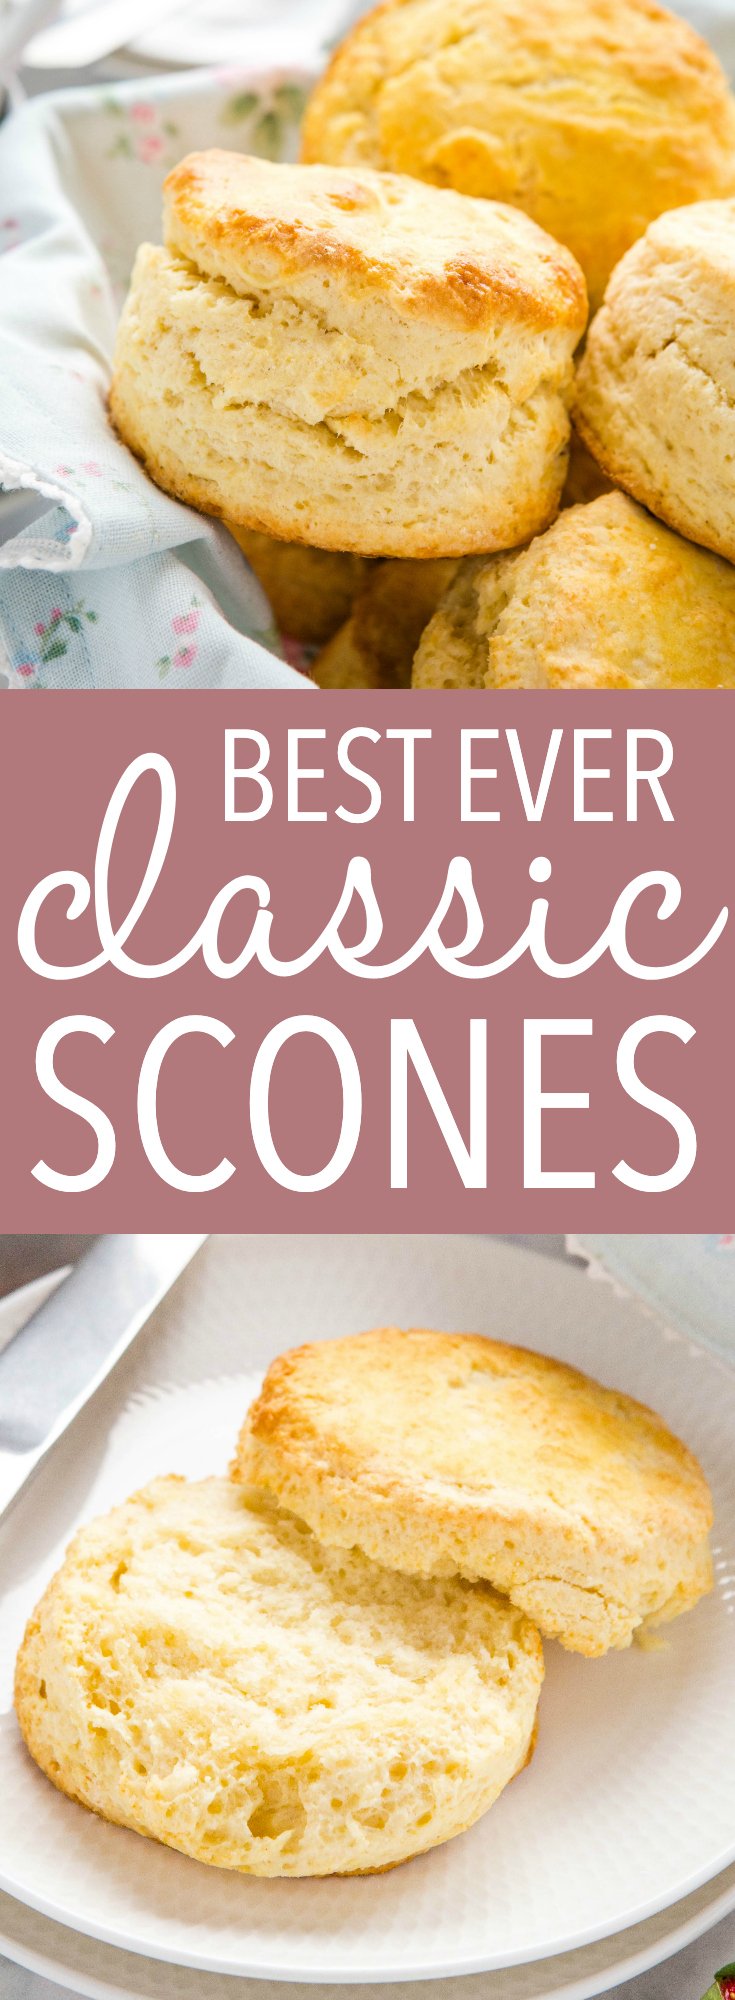 These Best Ever Classic Scones are the perfect tender, flaky scones just like grandma used to make! Made by hand with real butter - use my pro tips for the perfect scones every time! Recipe from thebusybaker.ca! #scones #biscuits #american #british #tea #dessert #snack #breakfast #jam #sconesrecipe #bestscones #easyscones via @busybakerblog